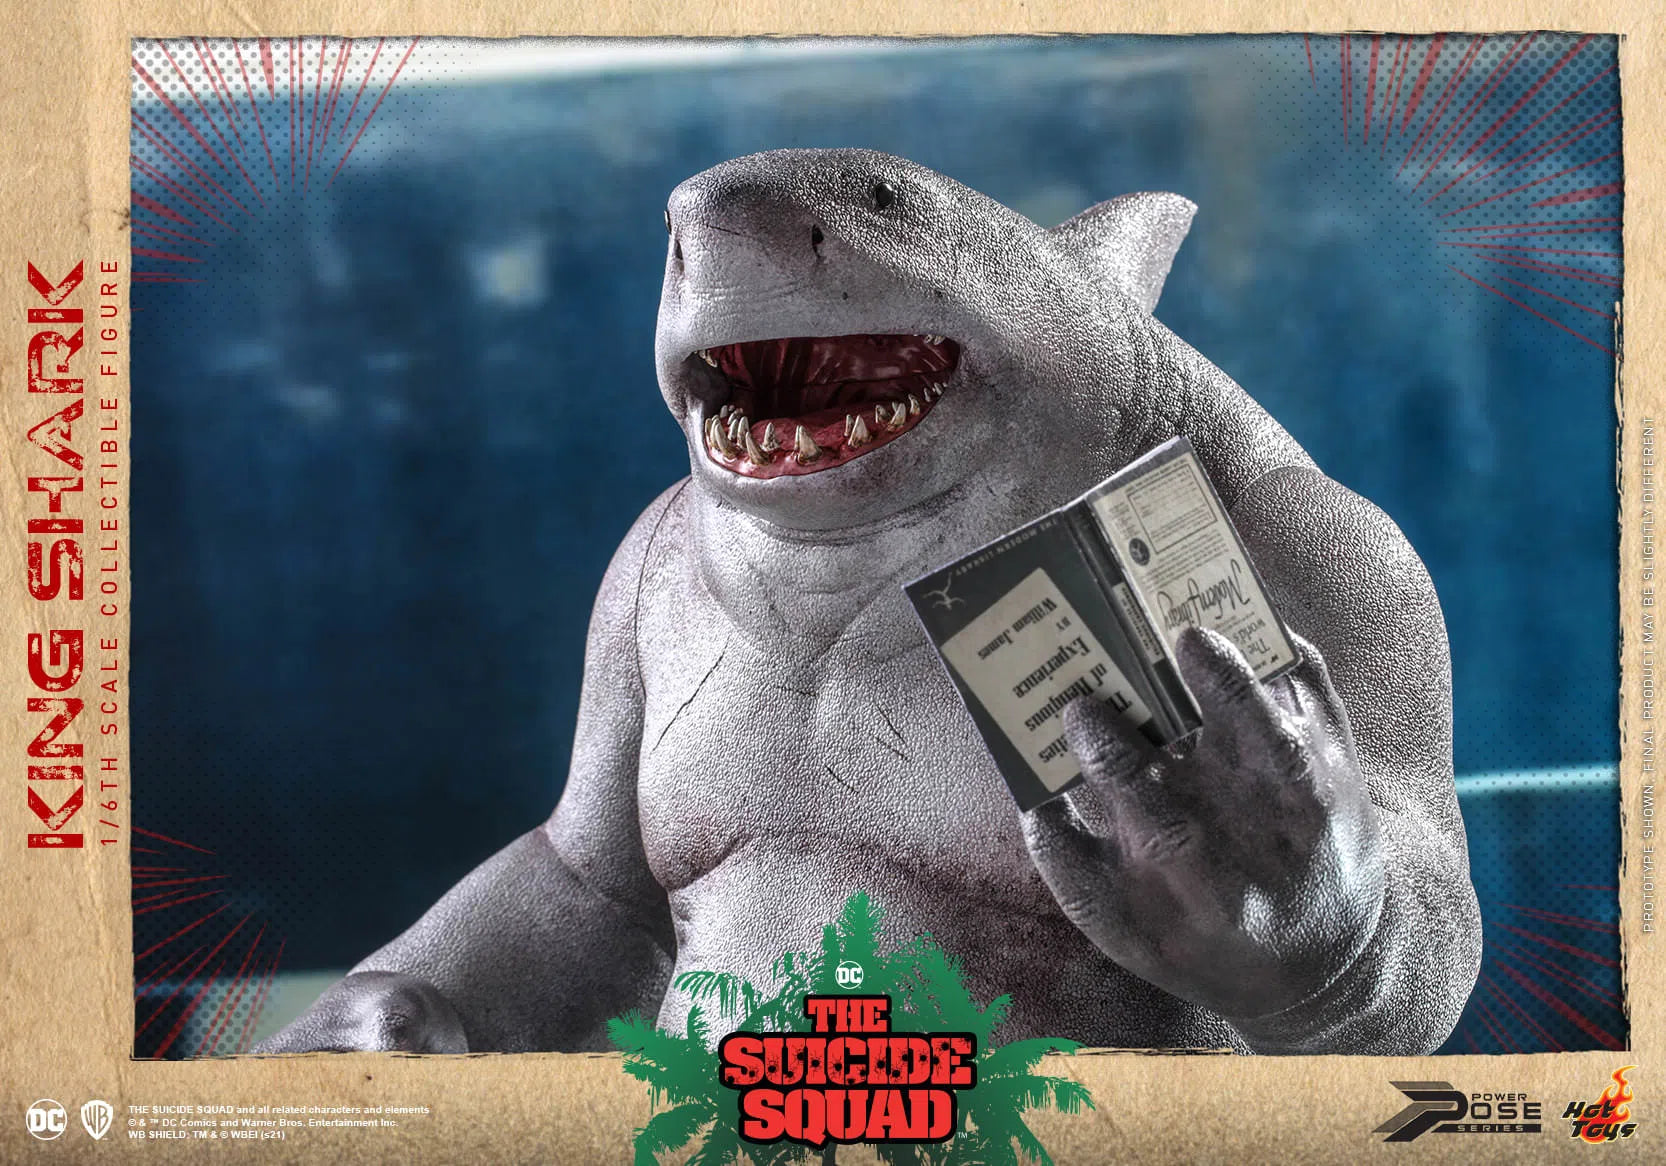 King Shark: The Suicide Squad: DC Comics: Power Pose: PPS006: Hot Toys